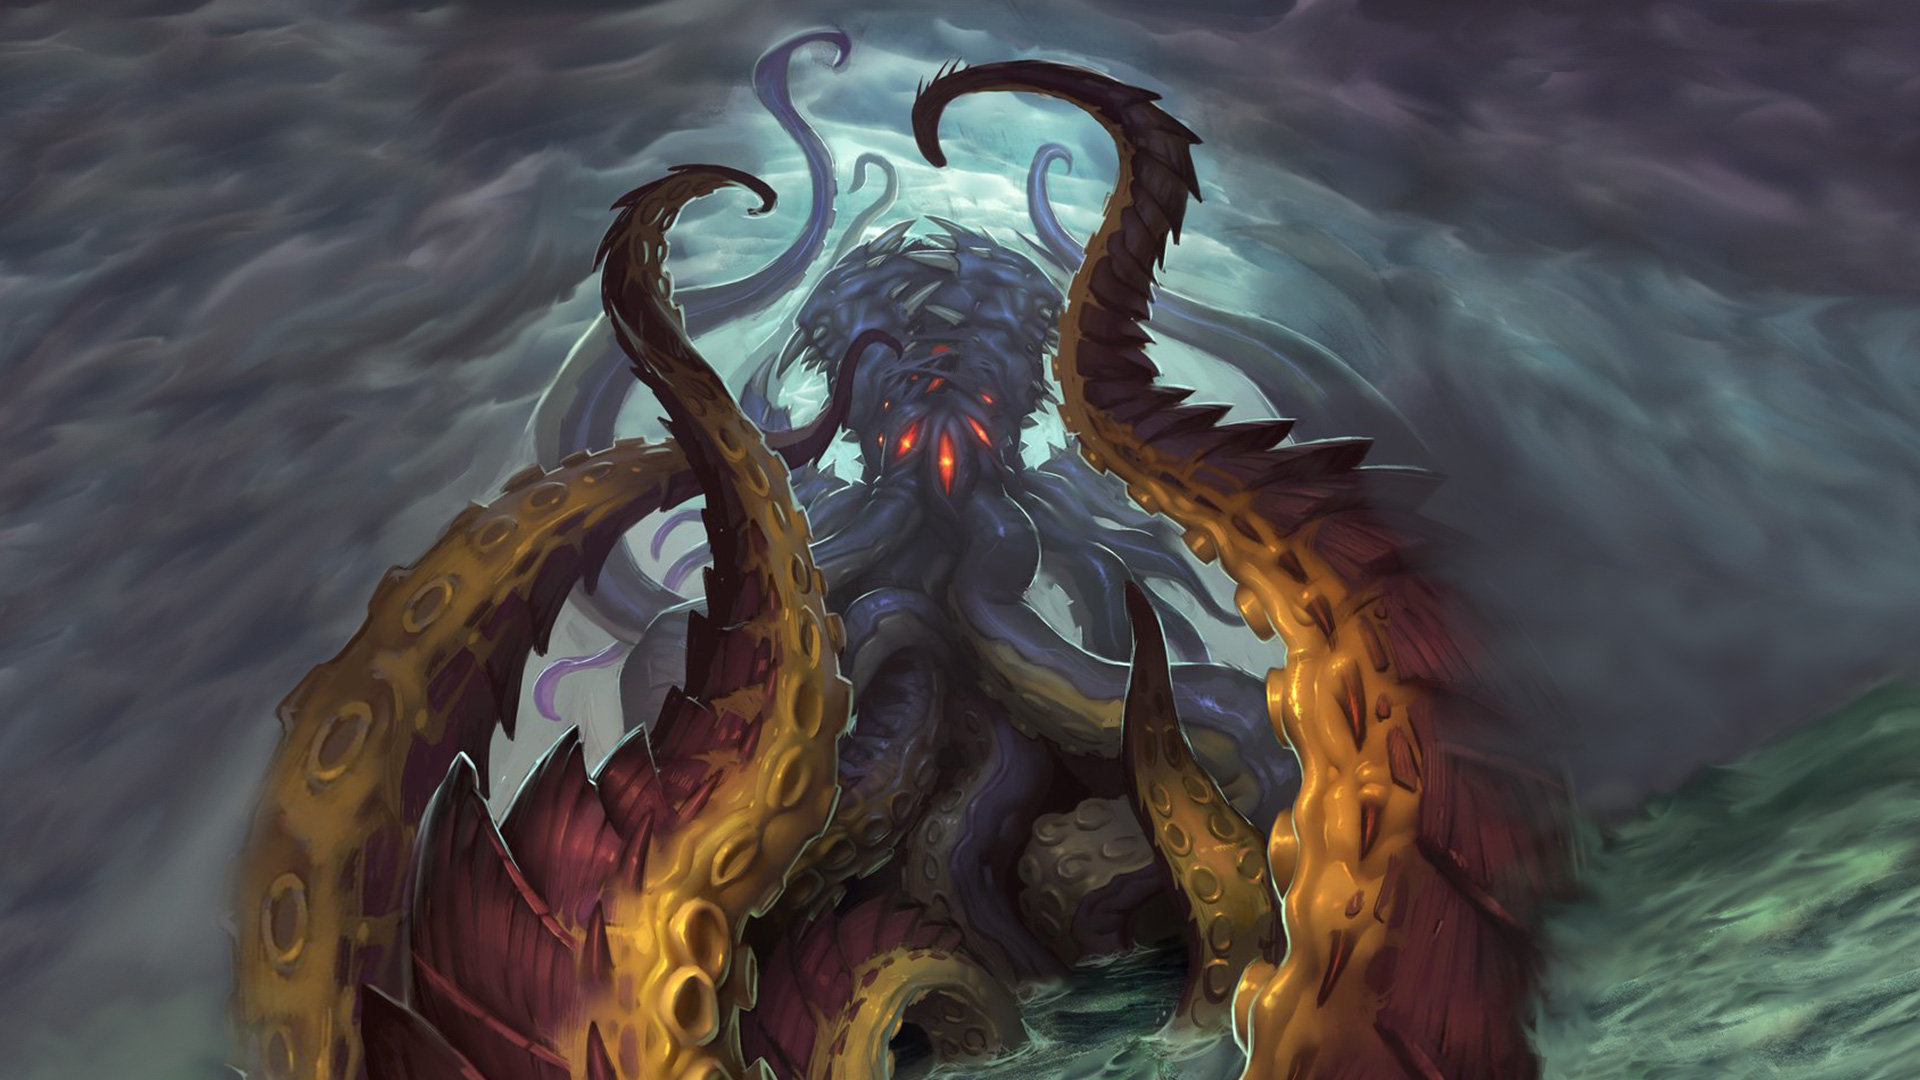 Whispers of the Old Gods Hearthstone Wallpaper for Desktop and Phones! Top Decks